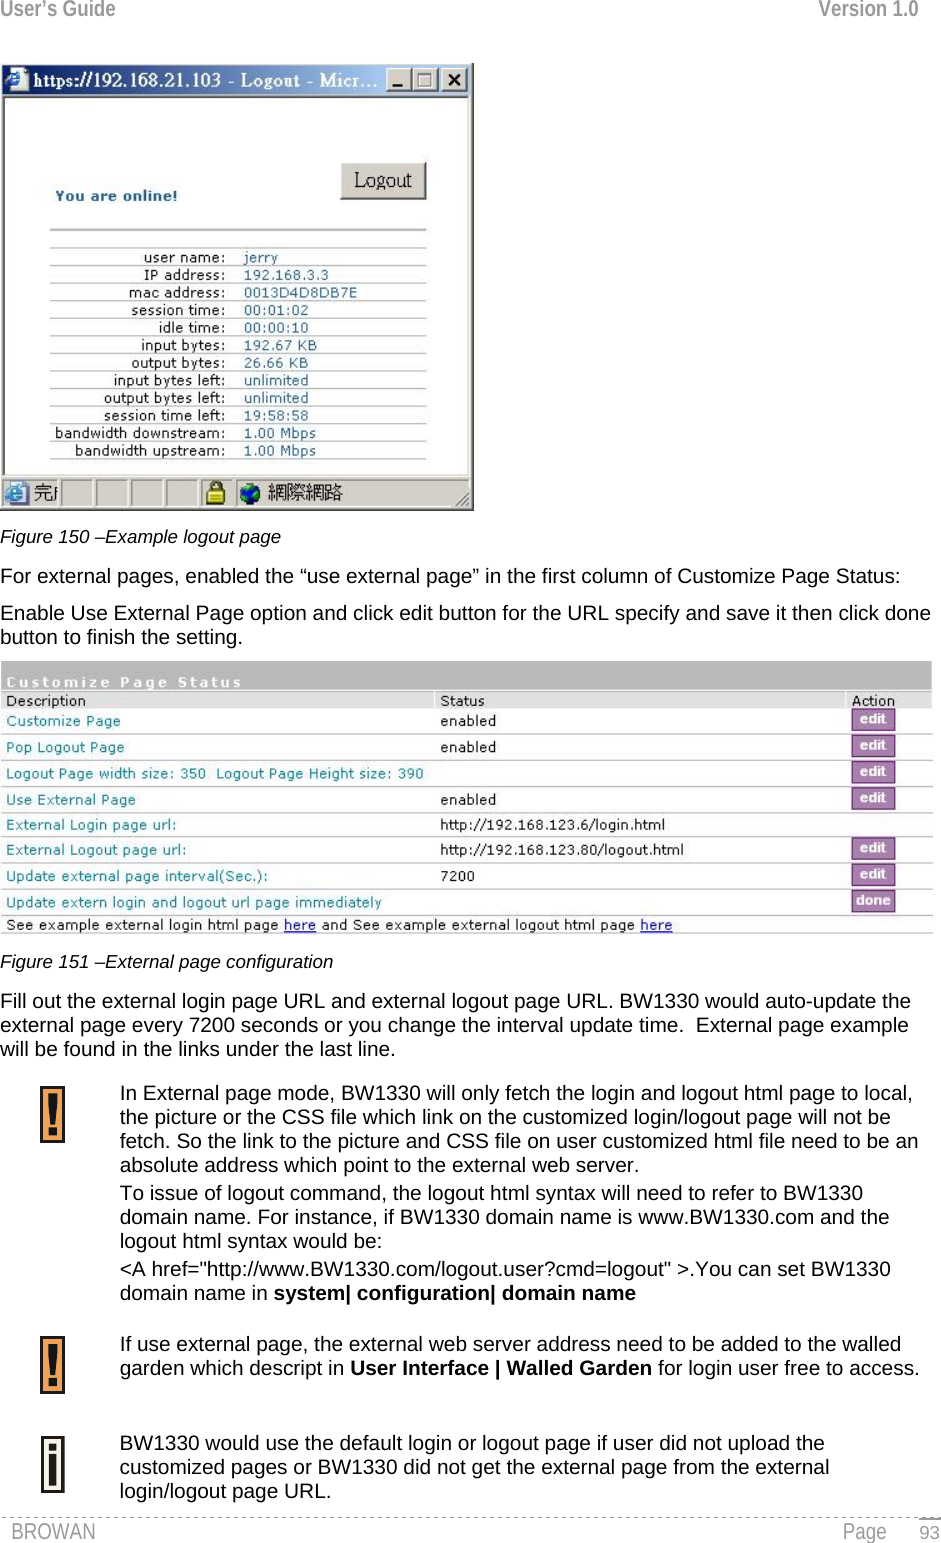 User’s Guide  Version 1.0   Figure 150 –Example logout page For external pages, enabled the “use external page” in the first column of Customize Page Status: Enable Use External Page option and click edit button for the URL specify and save it then click done button to finish the setting.  Figure 151 –External page configuration  Fill out the external login page URL and external logout page URL. BW1330 would auto-update the external page every 7200 seconds or you change the interval update time.  External page example will be found in the links under the last line. In External page mode, BW1330 will only fetch the login and logout html page to local, the picture or the CSS file which link on the customized login/logout page will not be fetch. So the link to the picture and CSS file on user customized html file need to be an absolute address which point to the external web server. To issue of logout command, the logout html syntax will need to refer to BW1330 domain name. For instance, if BW1330 domain name is www.BW1330.com and the logout html syntax would be:  &lt;A href=&quot;http://www.BW1330.com/logout.user?cmd=logout&quot; &gt;.You can set BW1330 domain name in system| configuration| domain name  If use external page, the external web server address need to be added to the walled garden which descript in User Interface | Walled Garden for login user free to access.  BW1330 would use the default login or logout page if user did not upload the customized pages or BW1330 did not get the external page from the external login/logout page URL.  BROWAN                                                                                                                                               Page   93